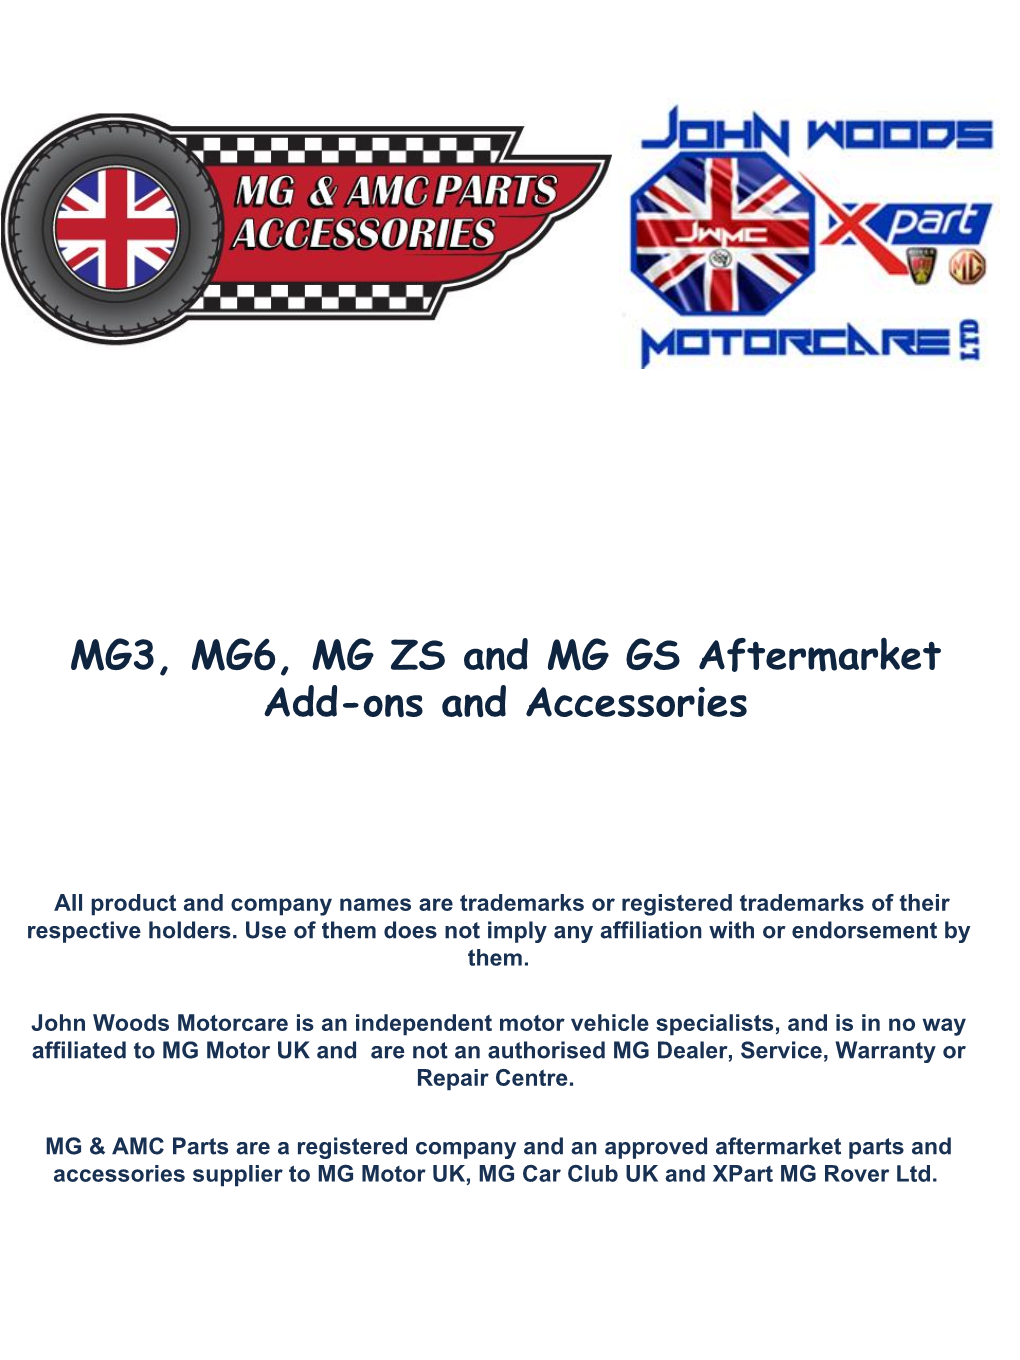 MG3, MG6, MG ZS and MG GS Aftermarket Add-Ons and Accessories